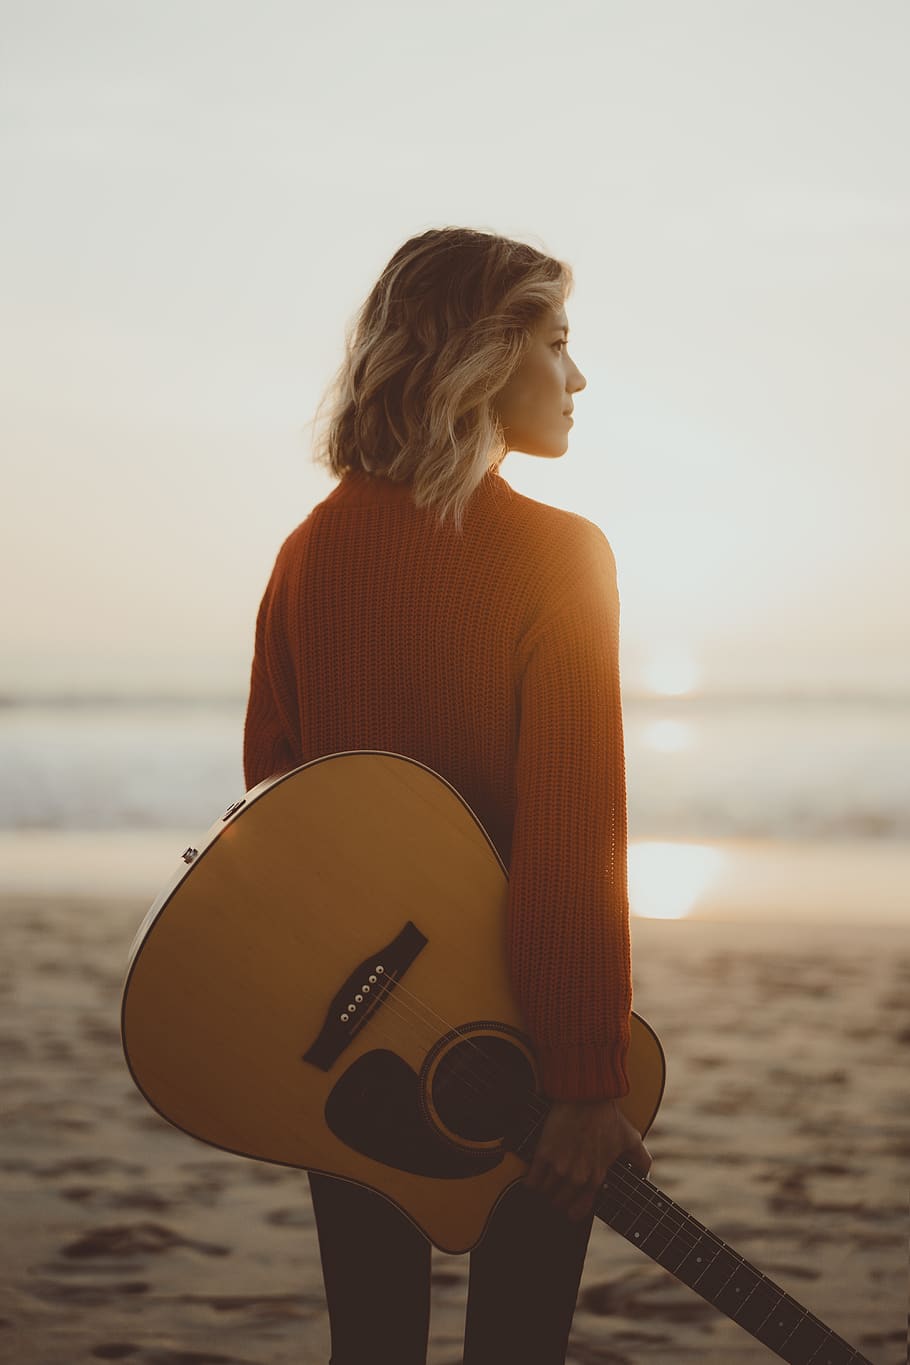 woman standing while holding acoustic guitar, sea, water, beach